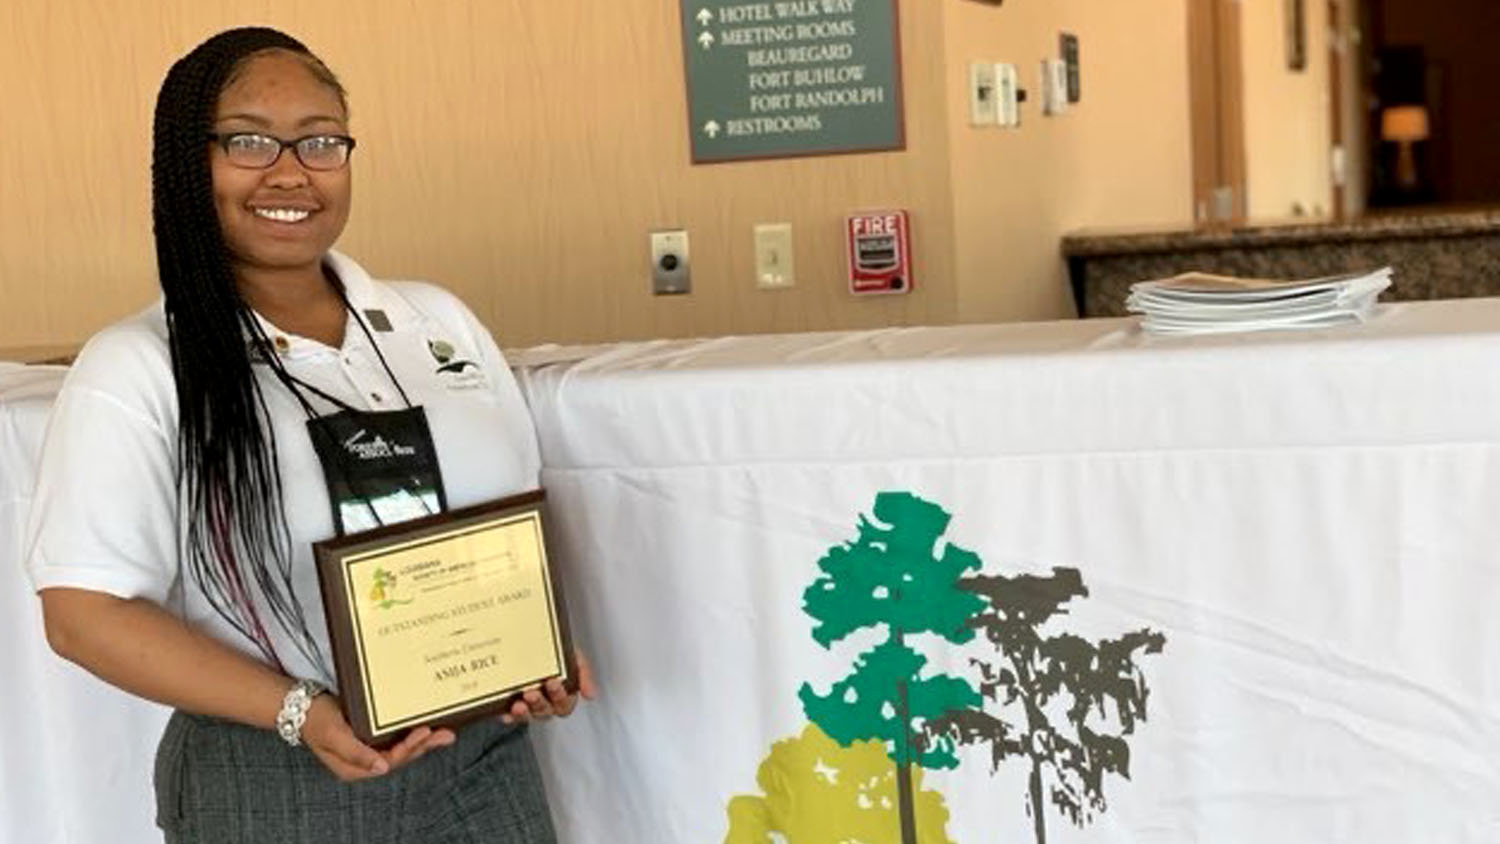 Asija Rice - National Needs Fellowship (NNF) Program - Forestry and Environmental Resources NC State University